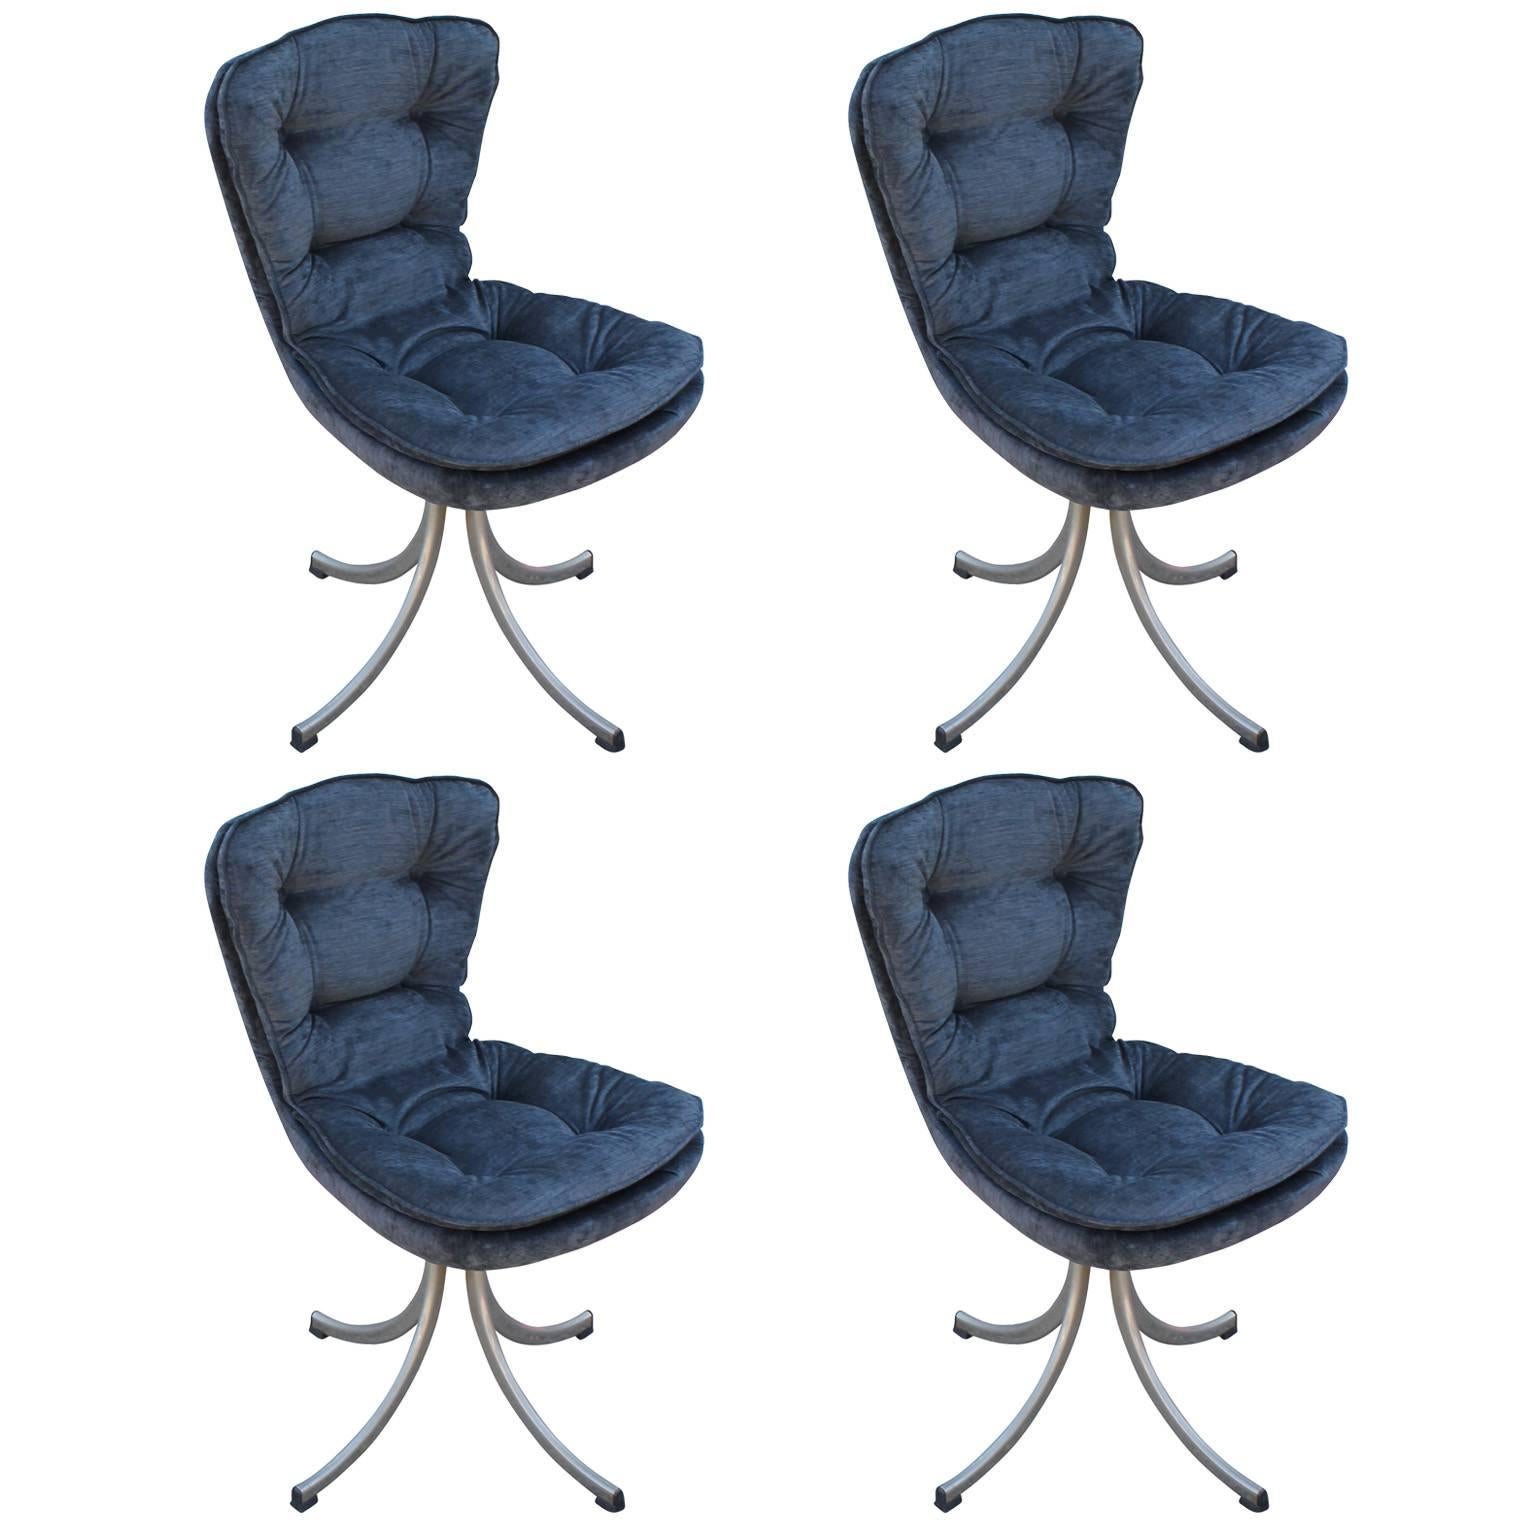 Stunning Set of Four Modern Swivel Tufted Dining Chairs in Charcoal Grey Velvet